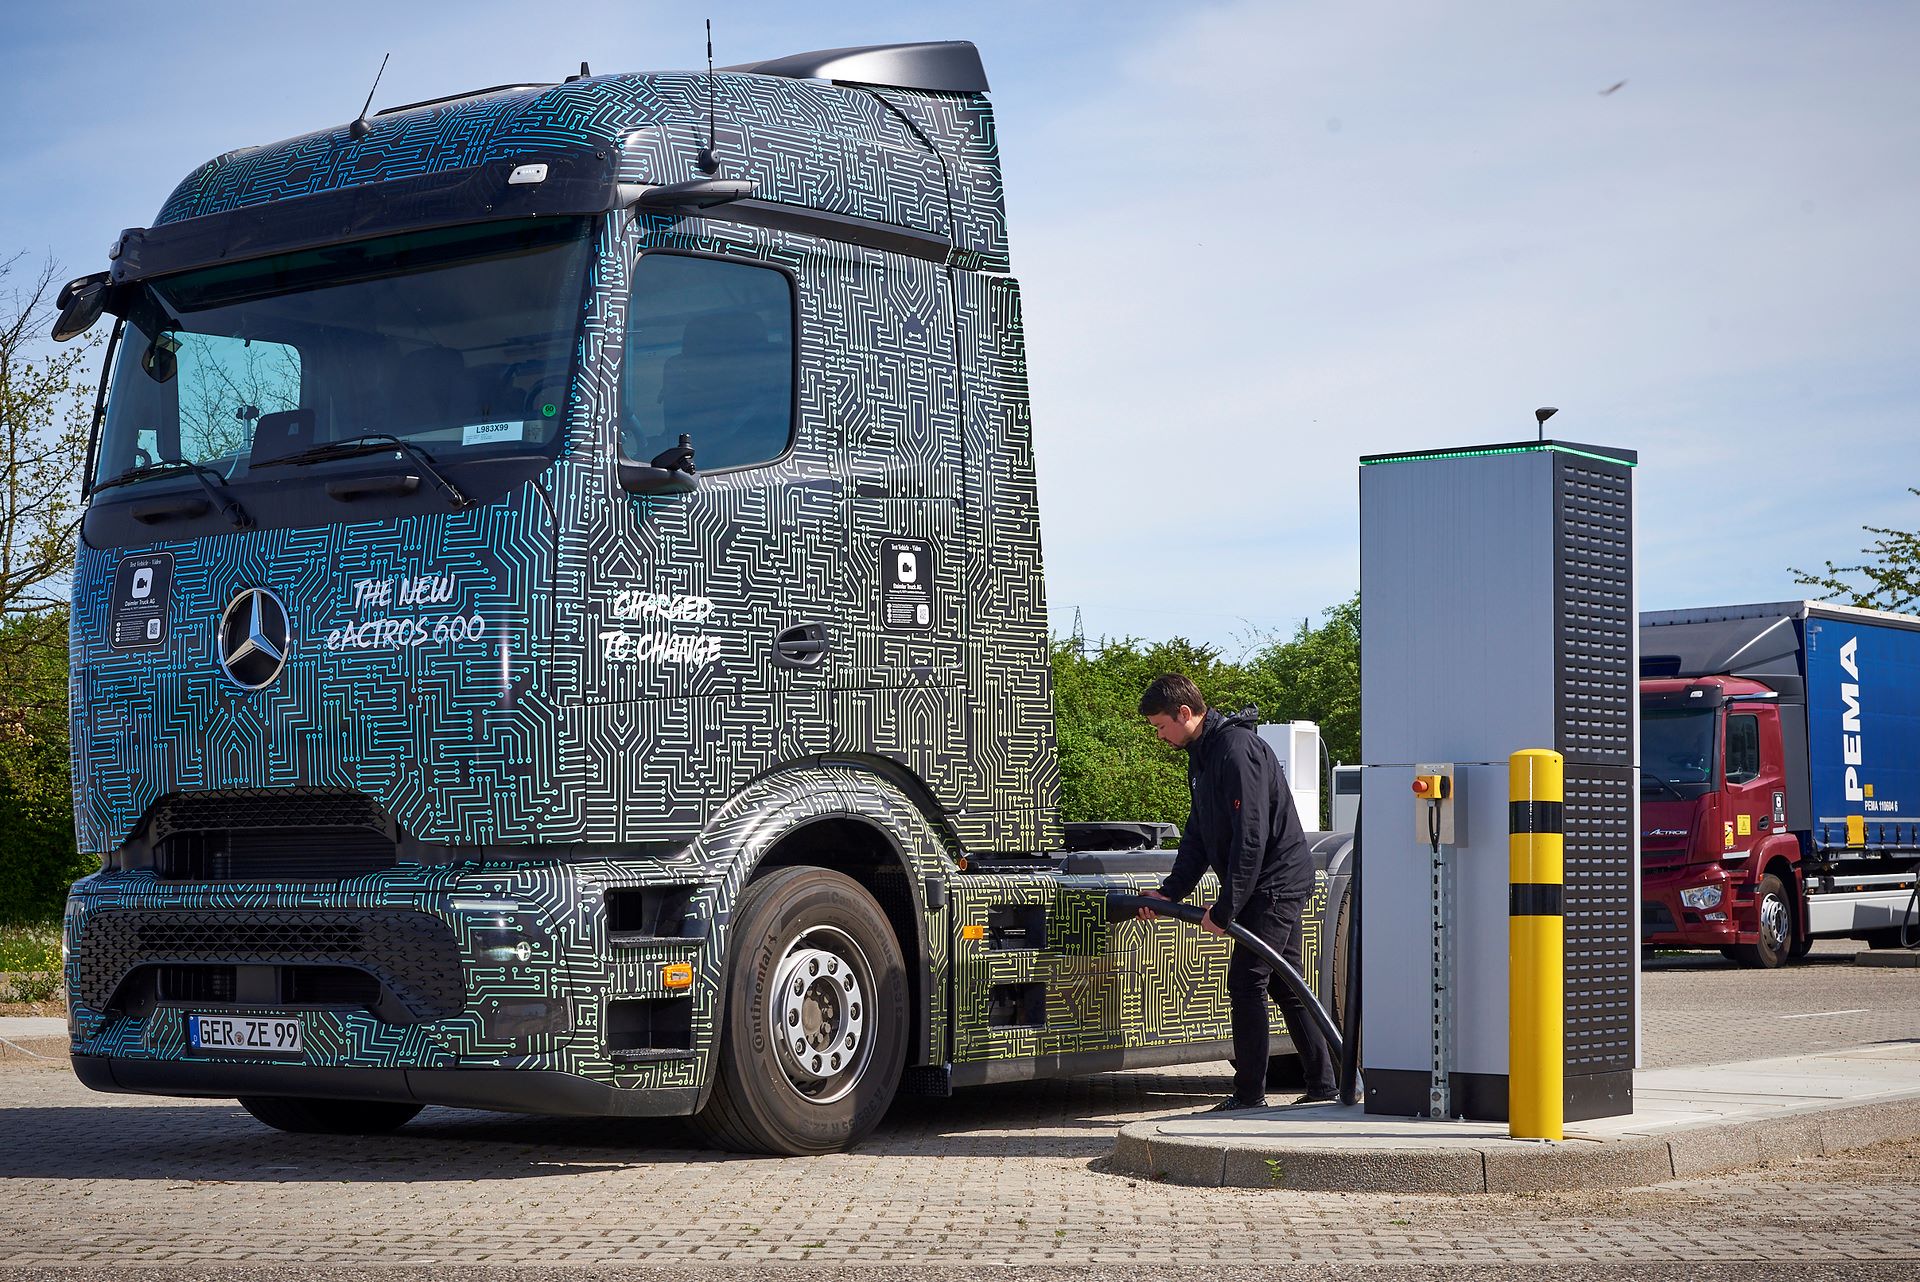 Mercedes-Benz Trucks developers charge an e-truck at 1,000 kilowatts for the first time during internal testing at Wörth am Rhein. Photo: Mercedes-Benz Trucks